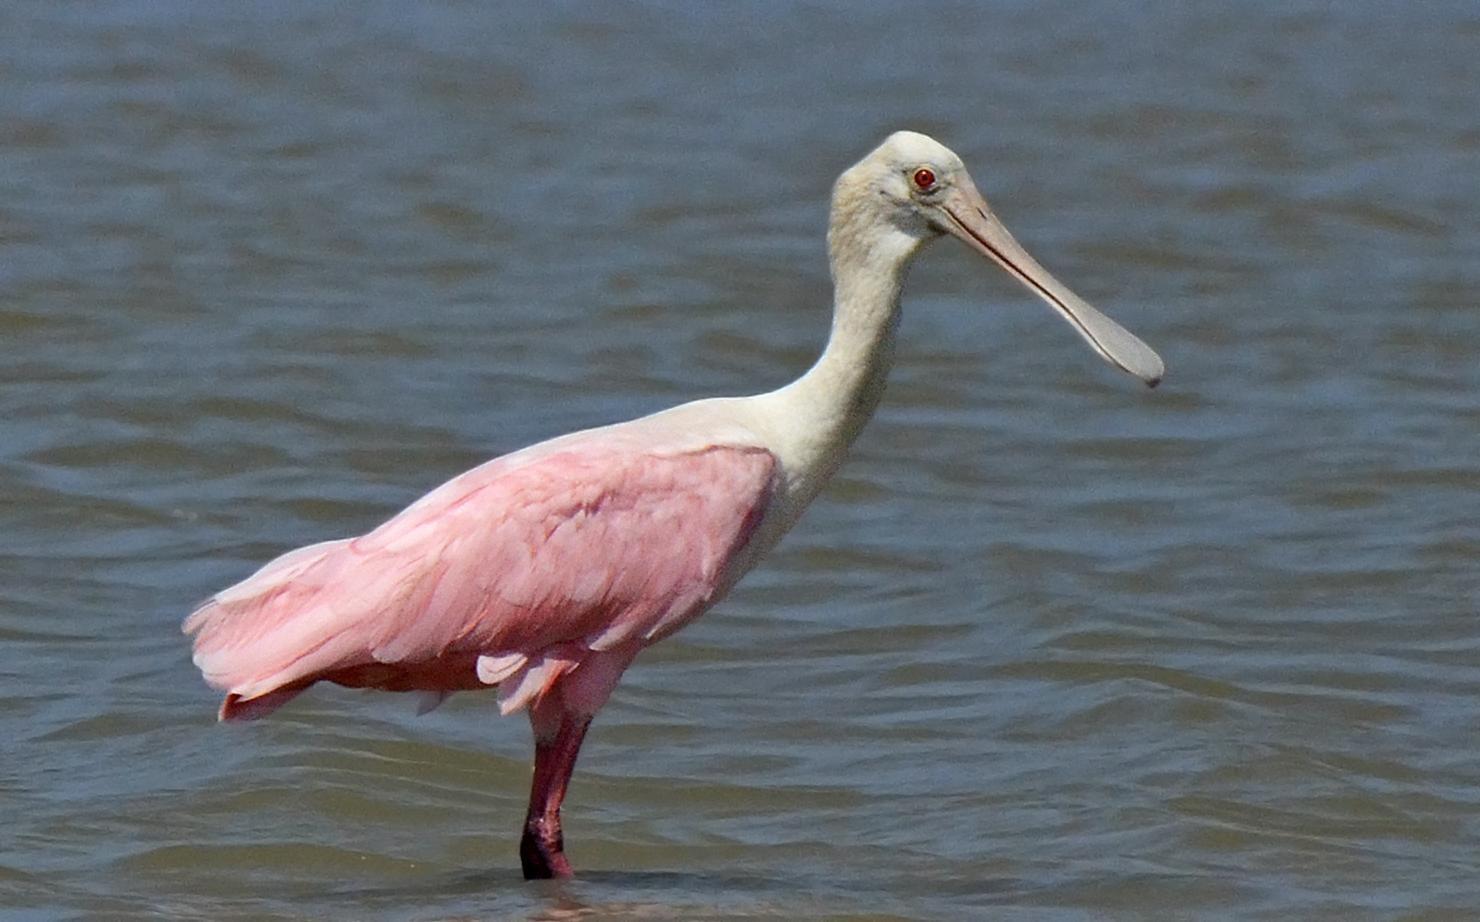 Roseate Spoonbill Photo by Steven Mlodinow